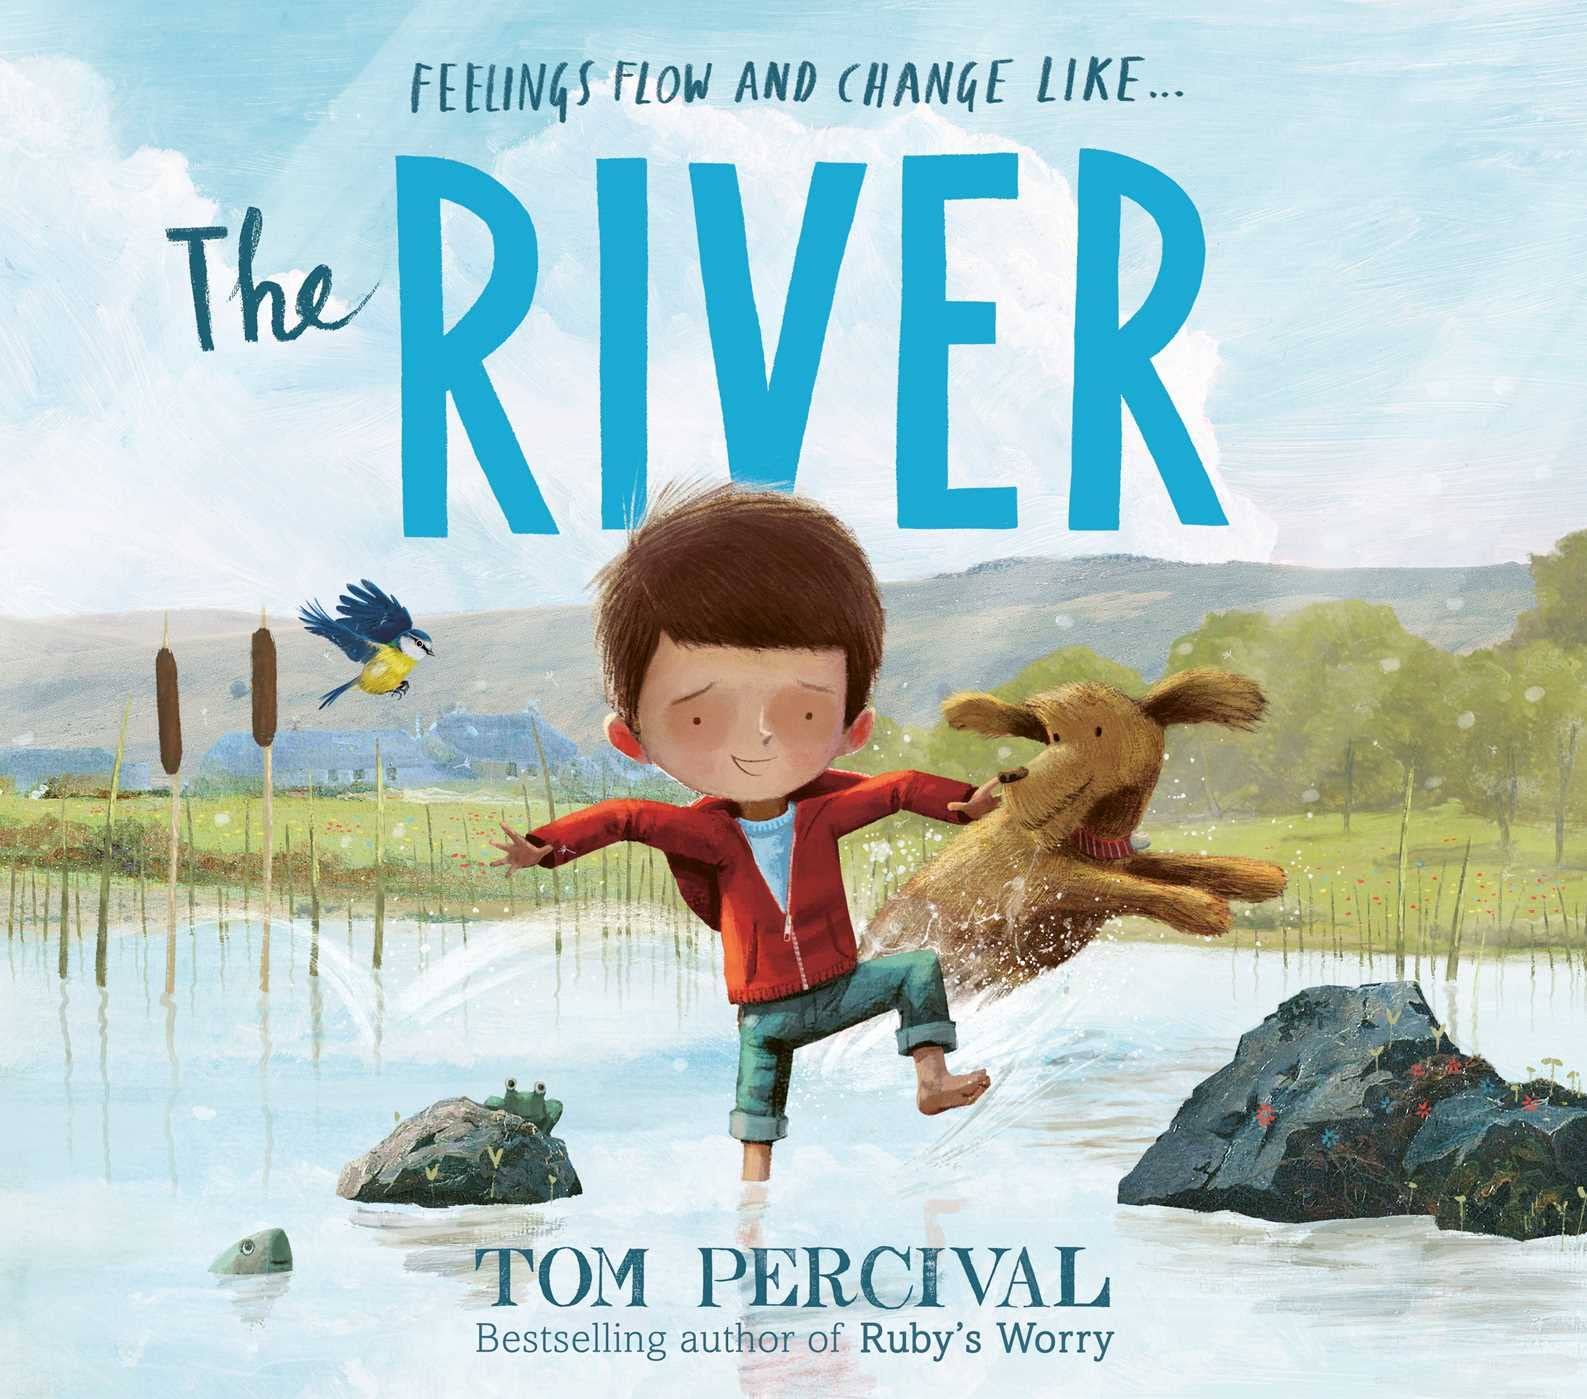 The River by Tom Percival (9781471191336)